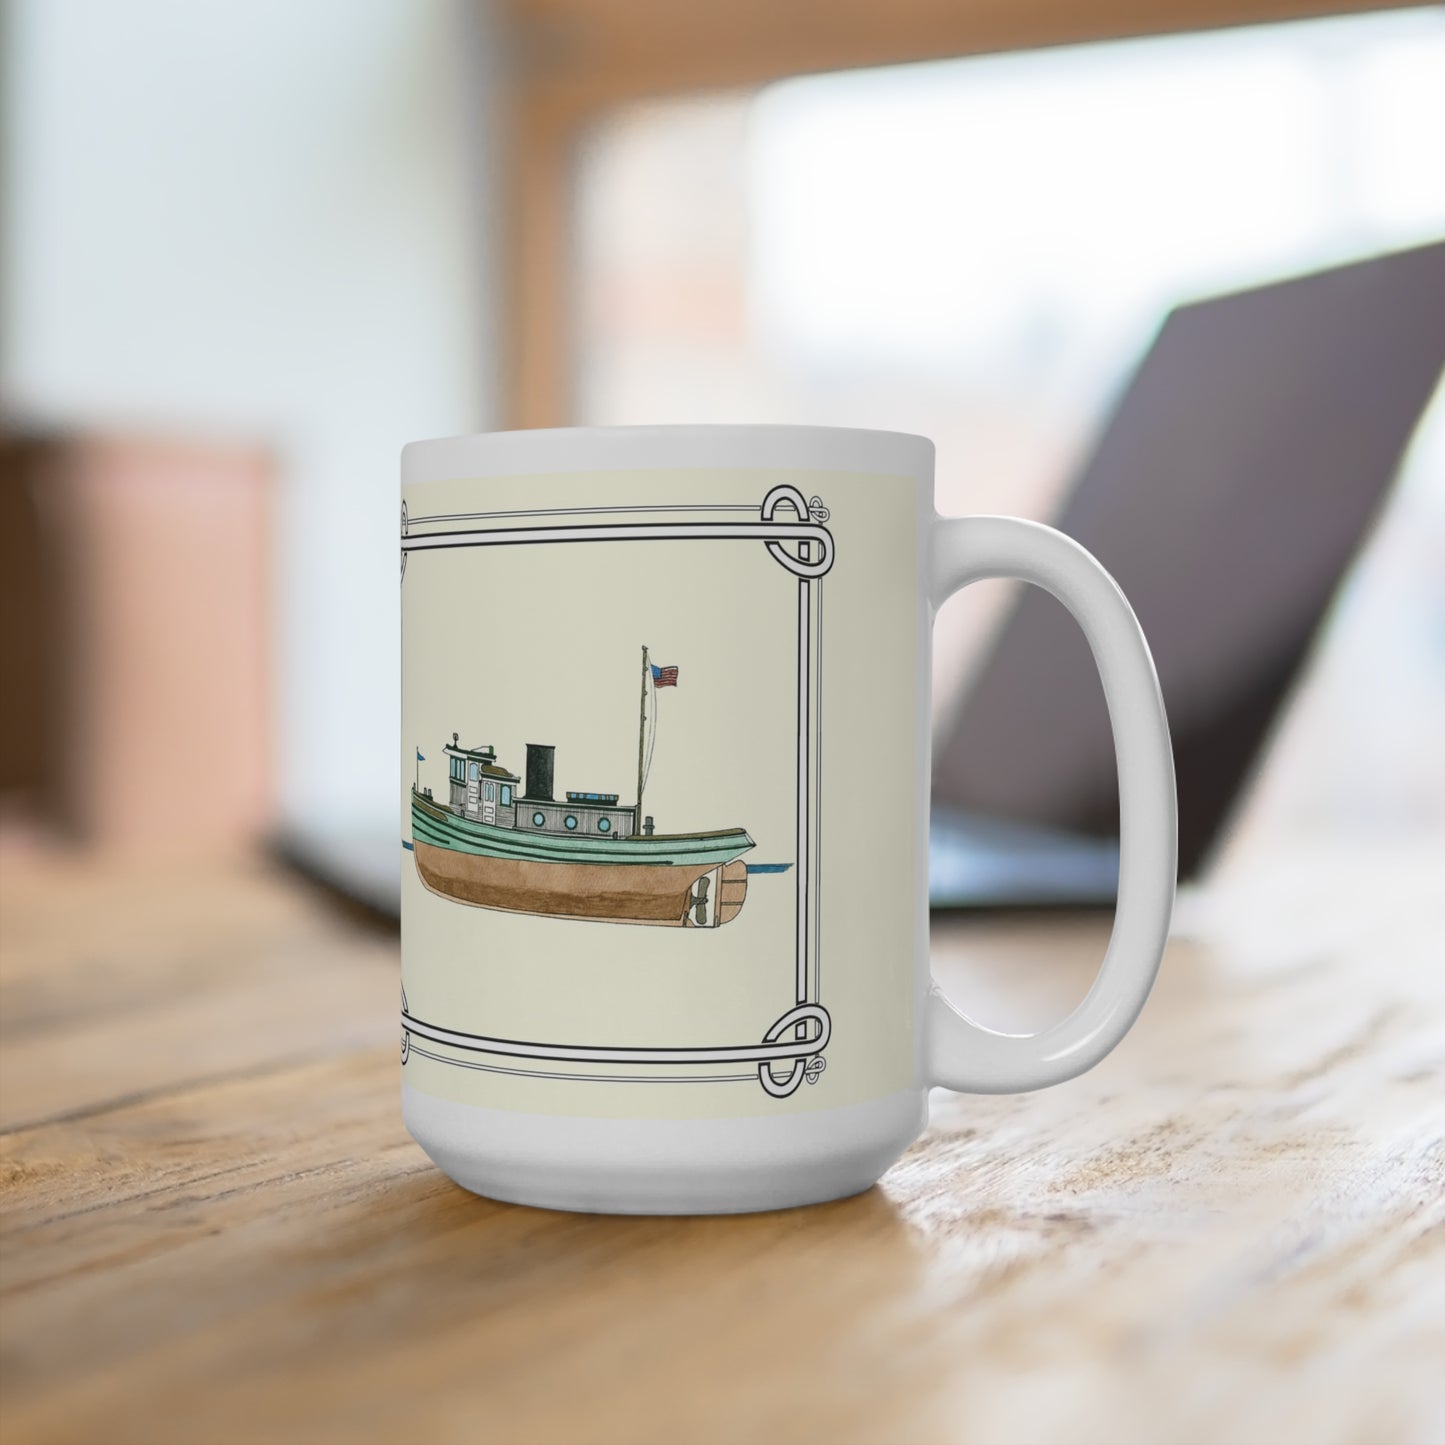 Enjoy your favorite beverage in the Zephyr Tugboat Mug as you work on your laptop.The Zephyr Diesel Tugboat was a New York Harbor Tug Boat with classic tugboat styling. The mug design is a reproduction of an original watercolor by Lee M. Buchanan and has the image on the front and back of the mug. 